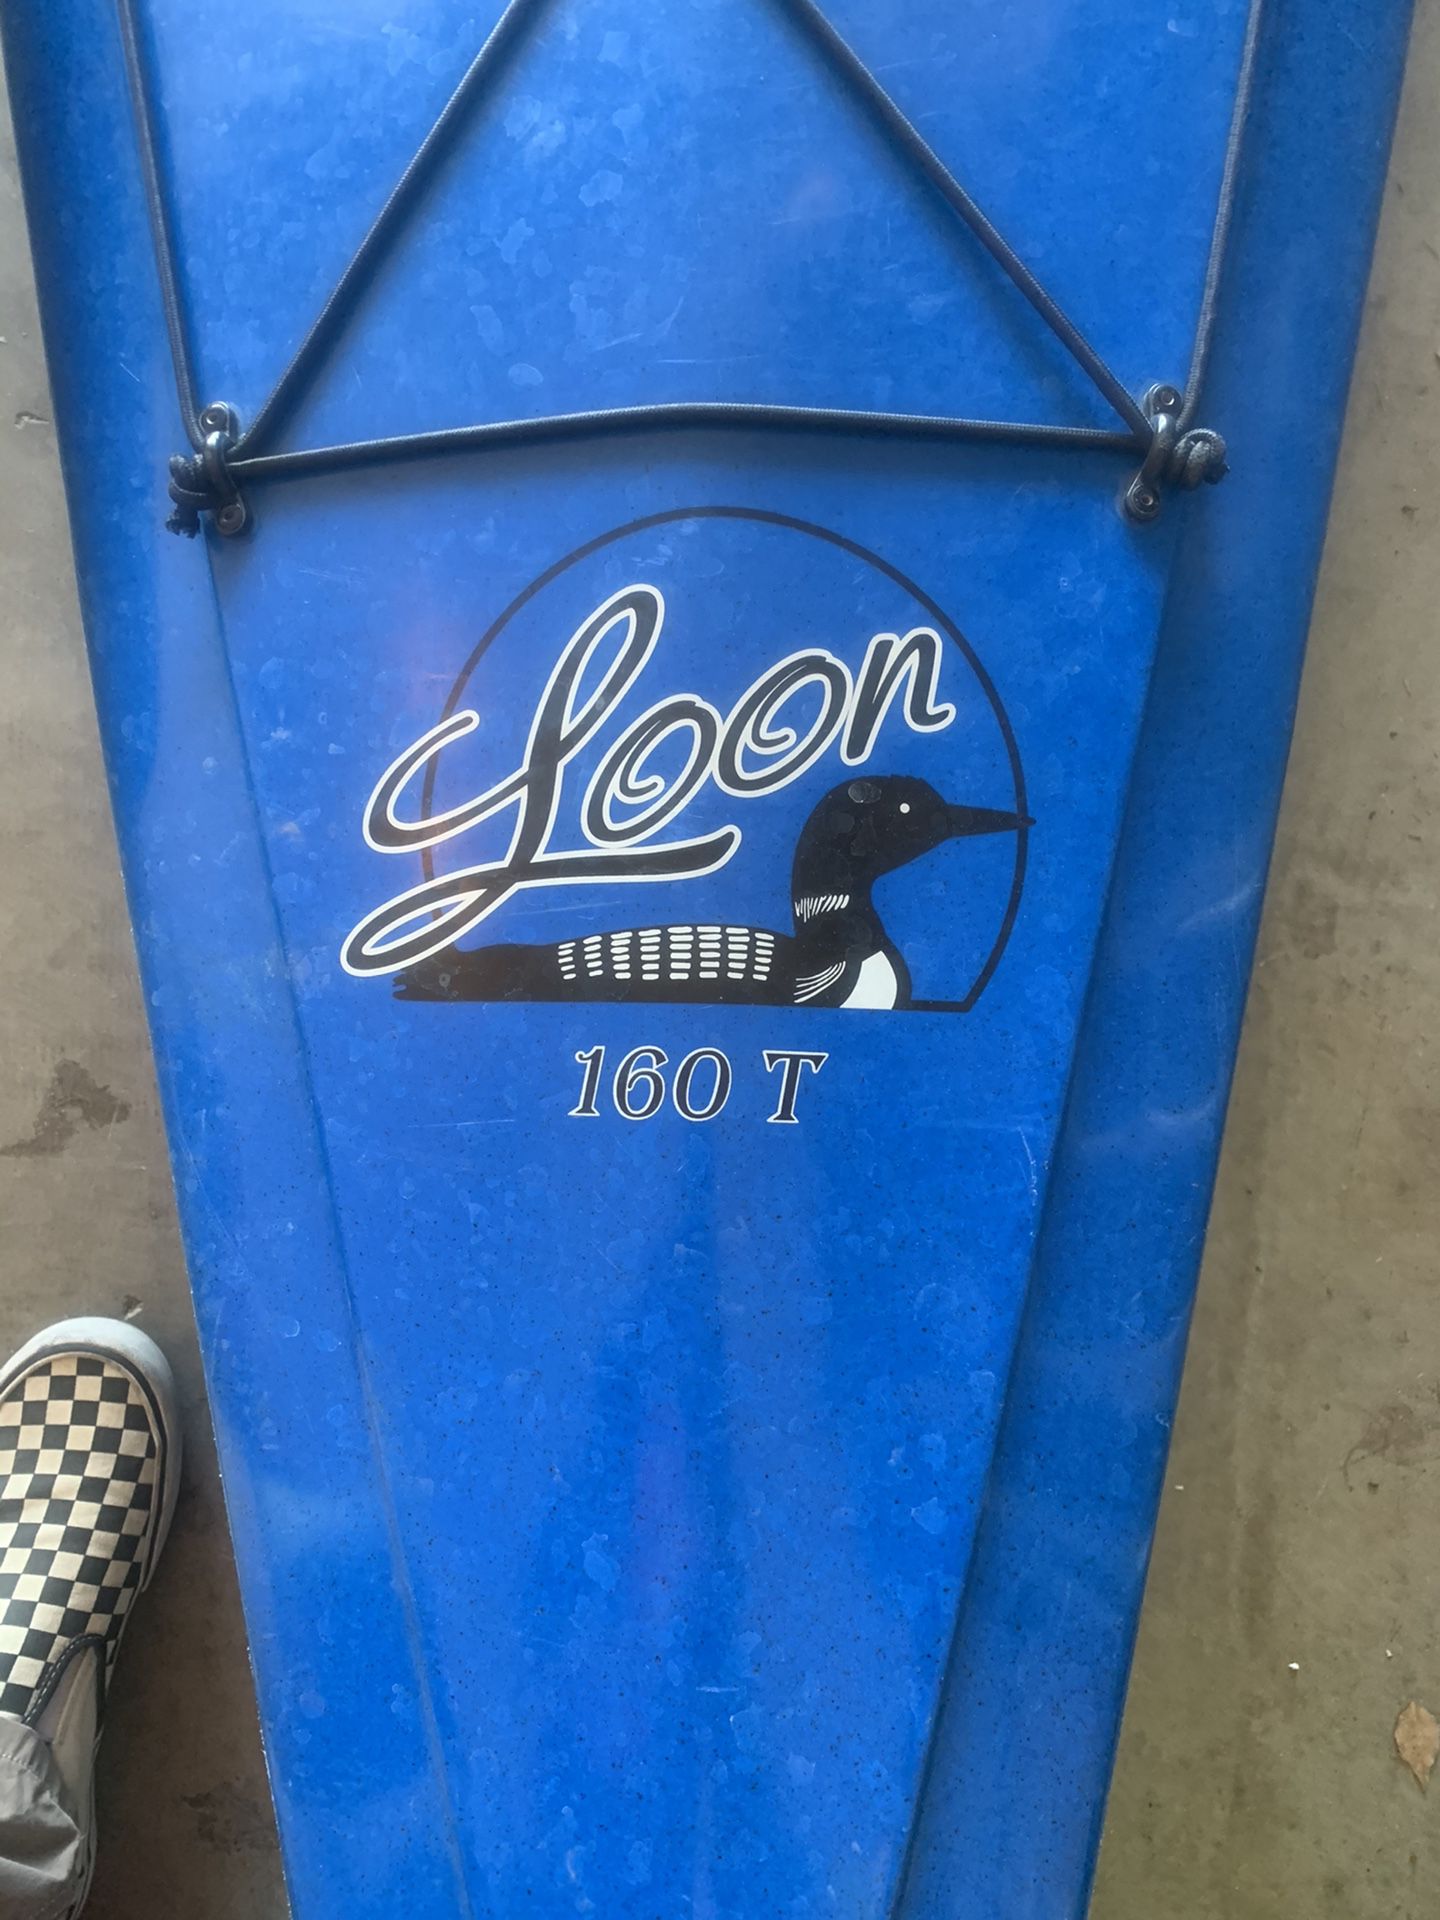 Old Town Loon 160T